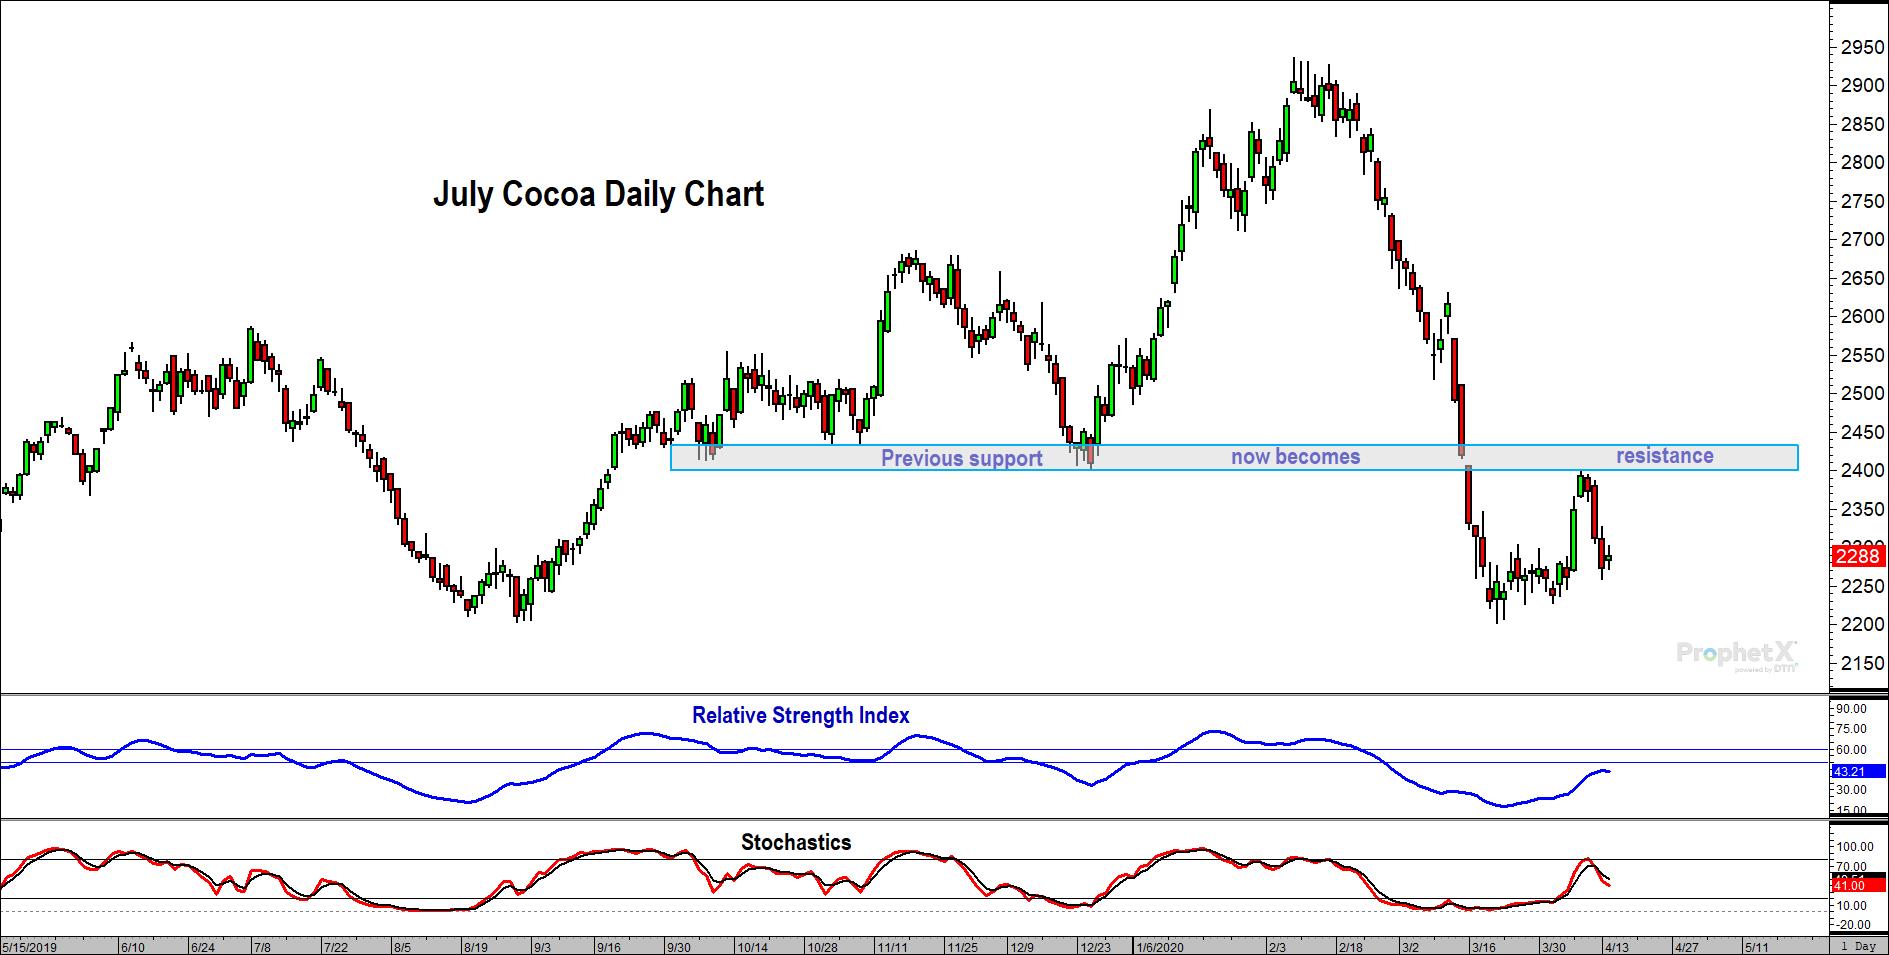 Cocoa futures continuous contract